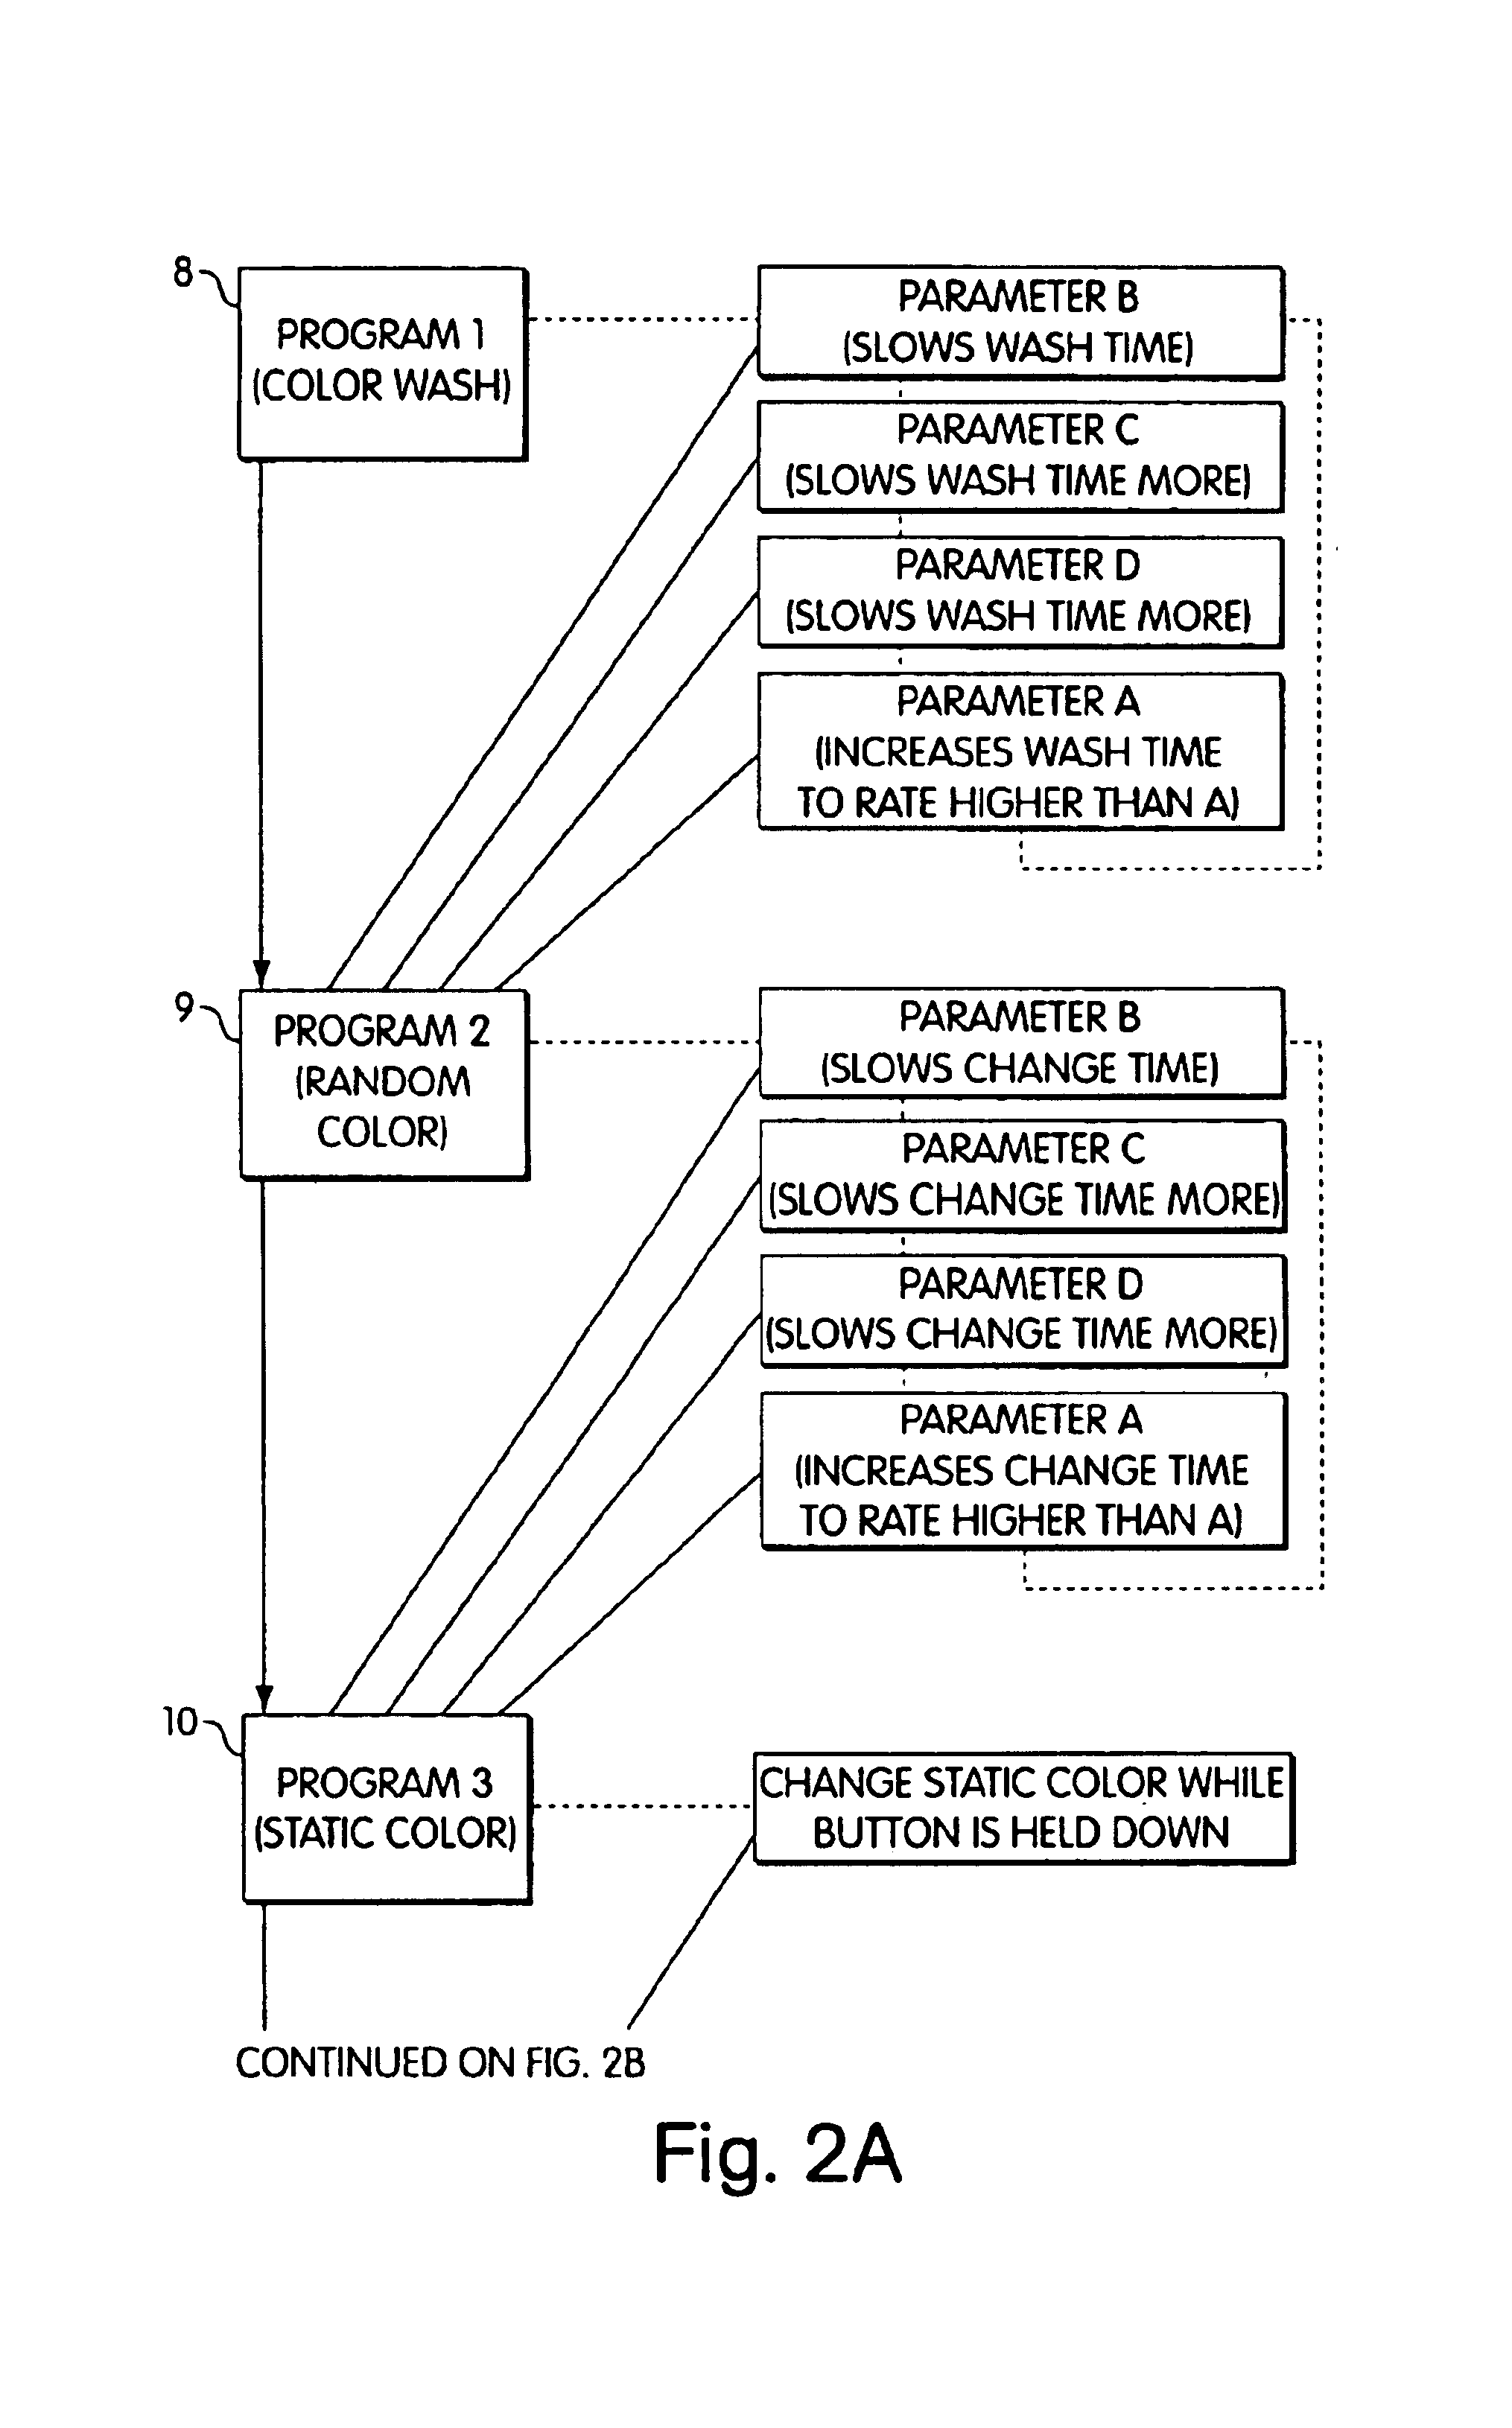 Light-emitting diode based products